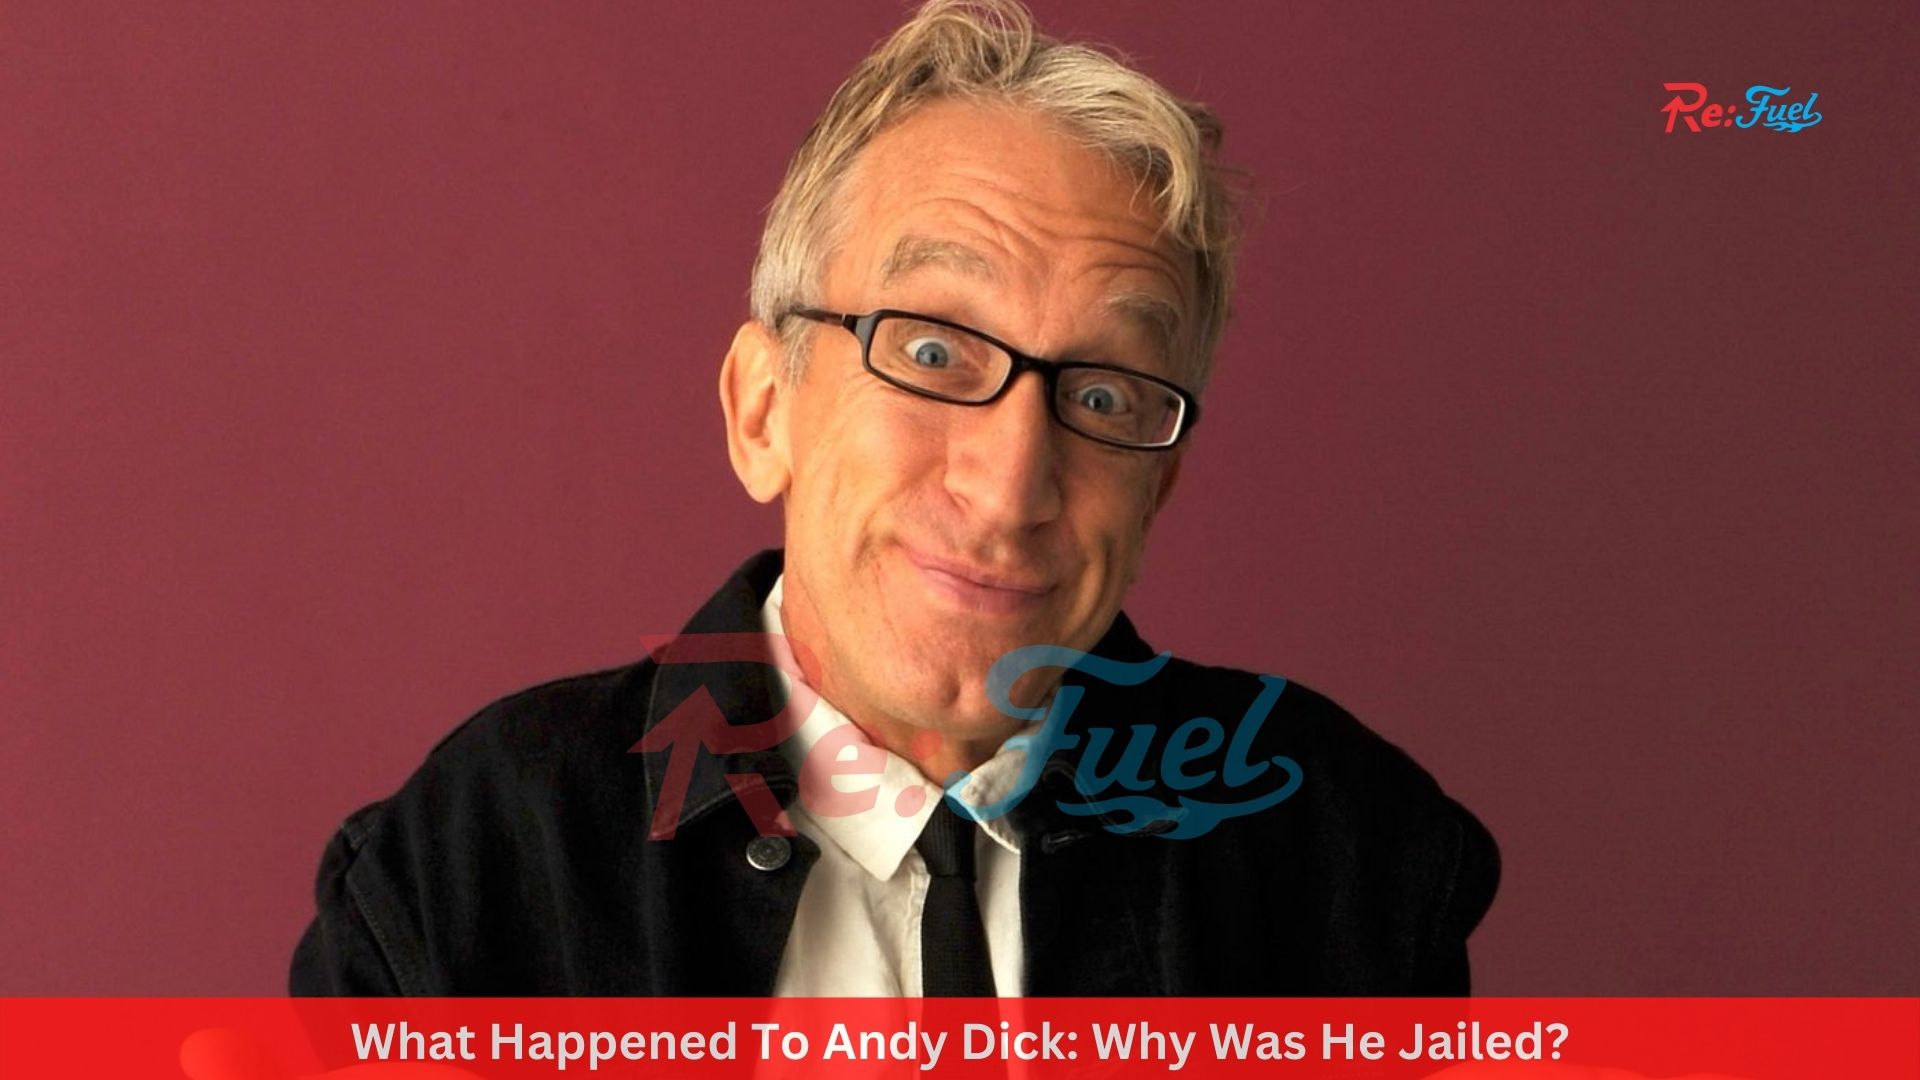 What Happened To Andy Dick: Why Was He Jailed?